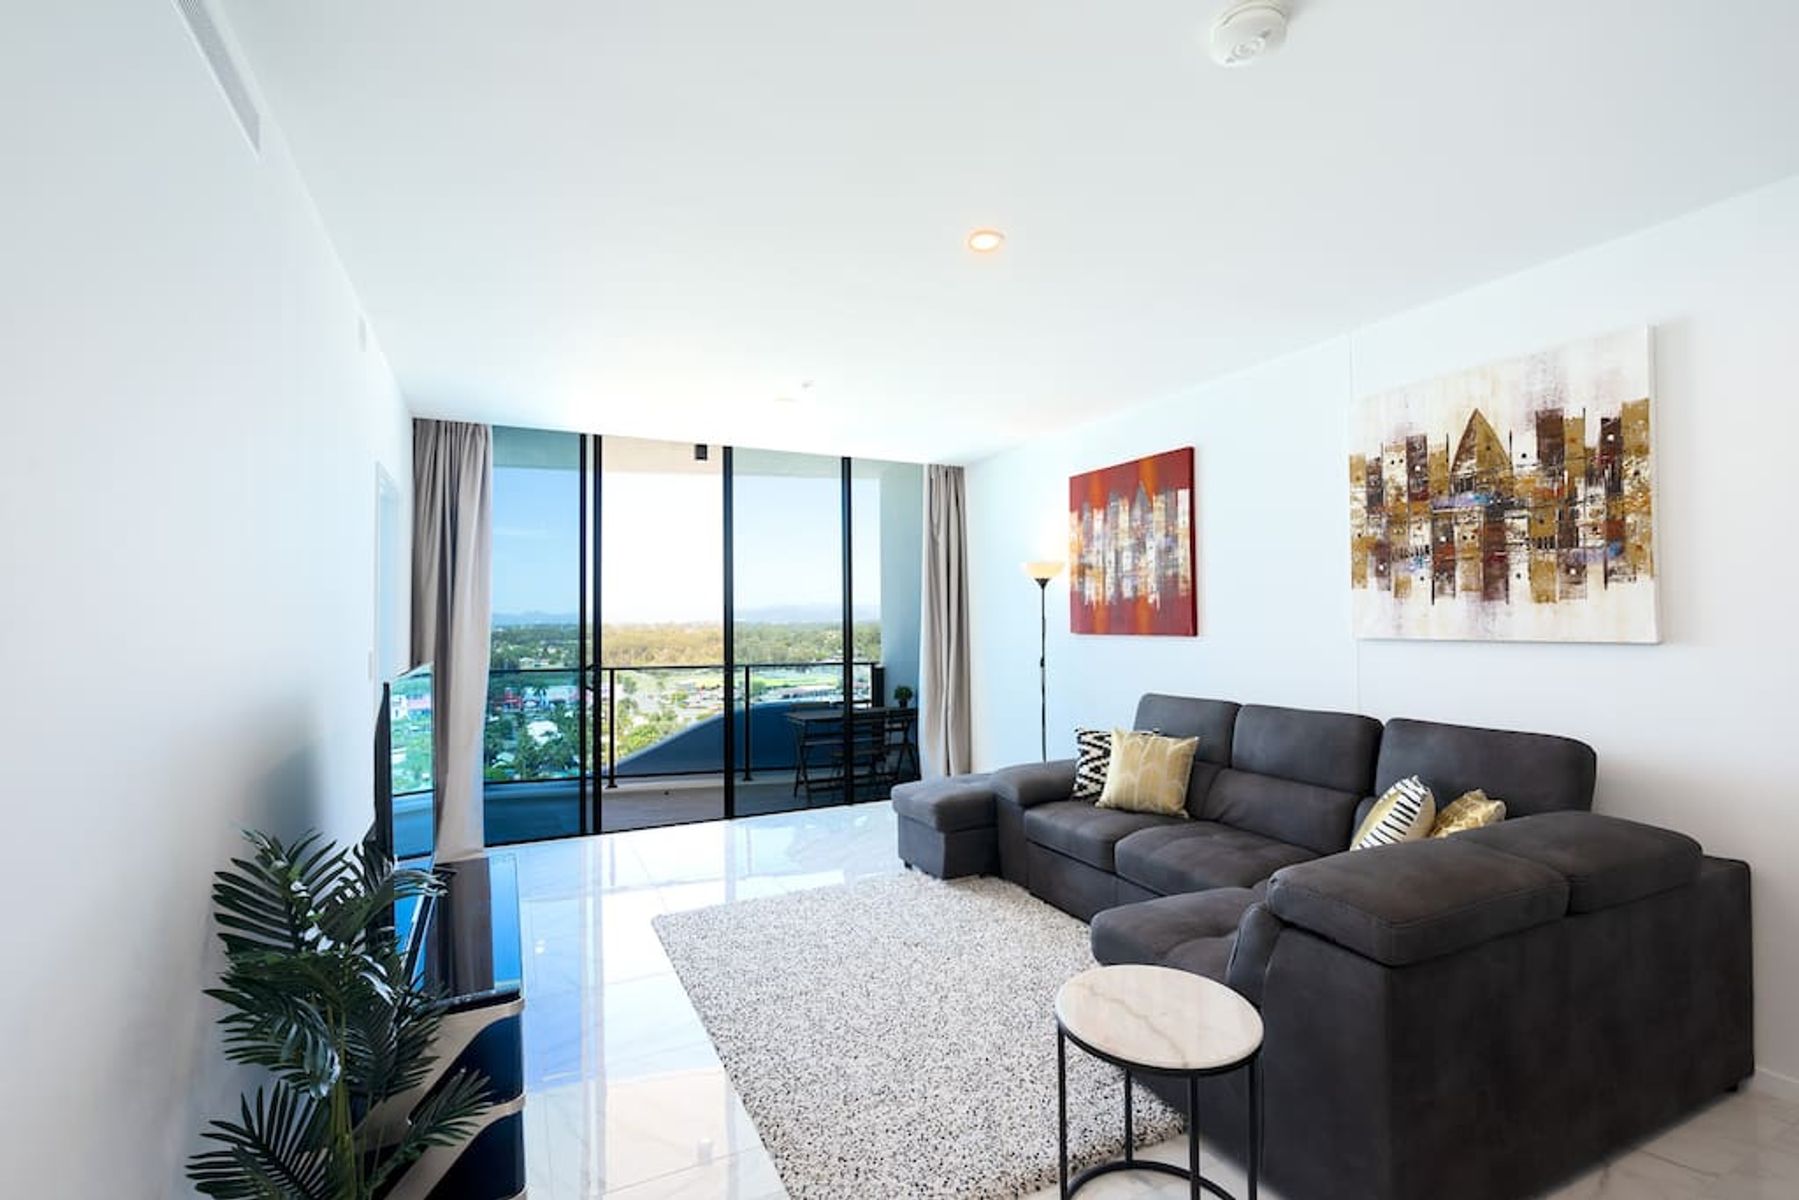 41210 5 Harbour side court Biggera Waters Anna Tang  Waterpoint